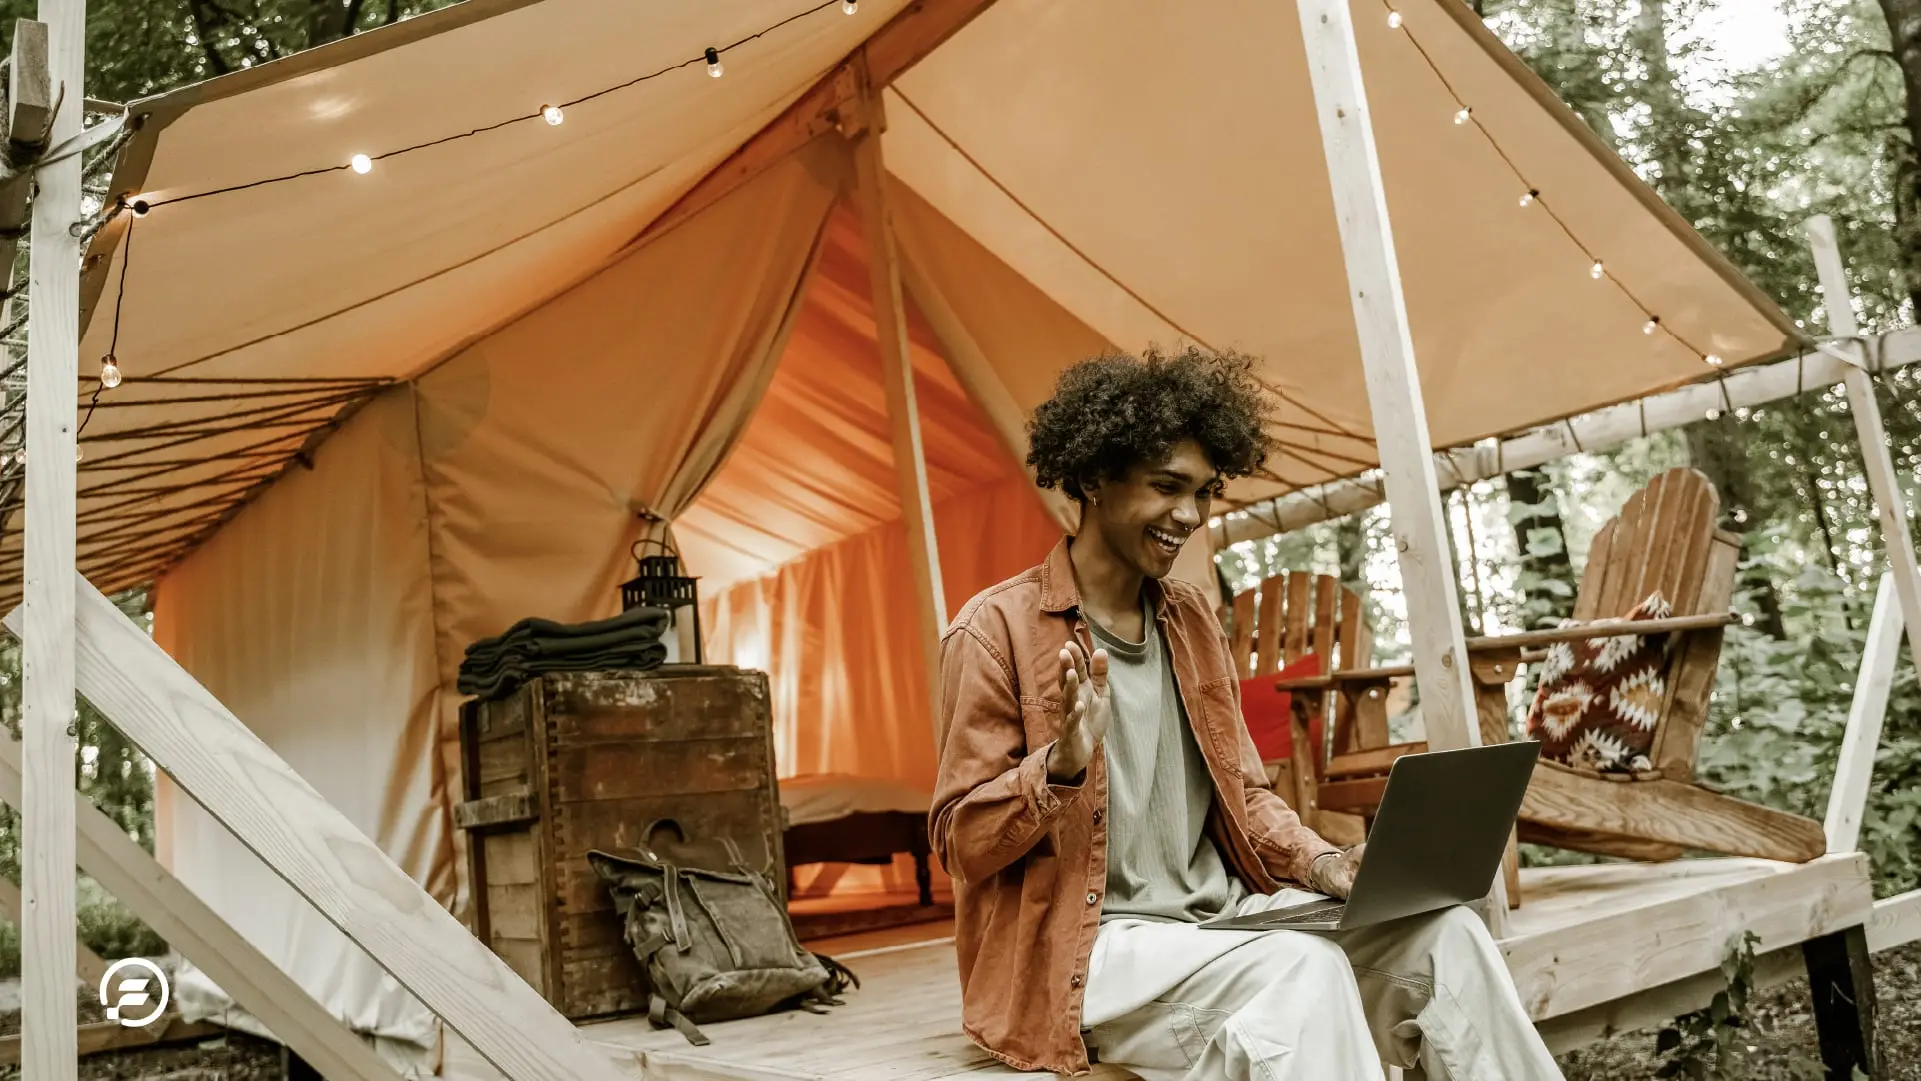 A digital nomad working outside at a campsite using a laptop